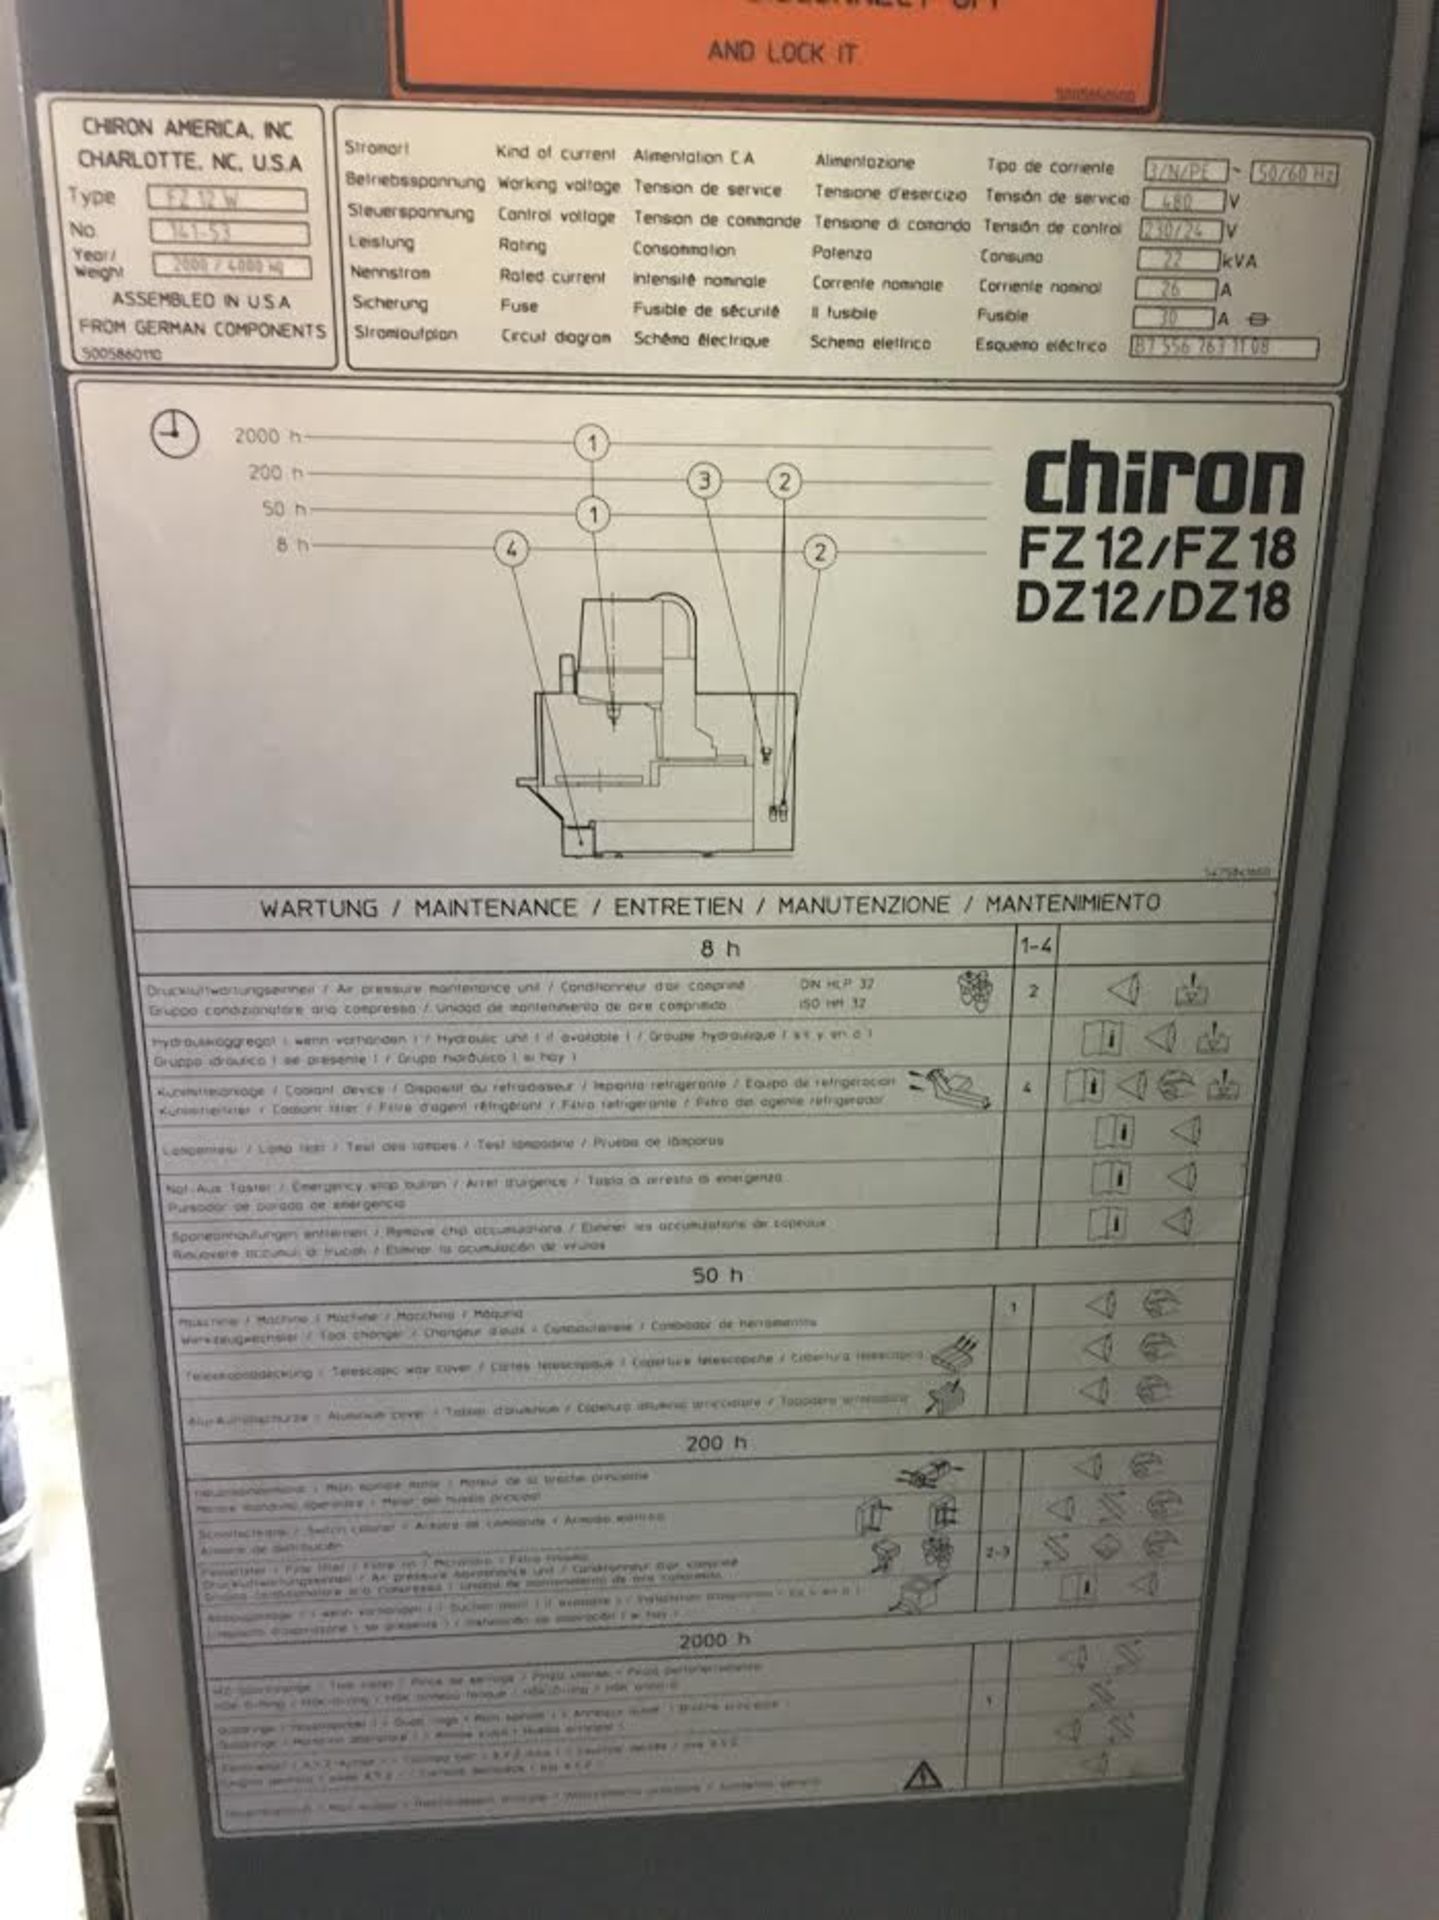 Chiron FZ-12W Magnum CNC Vertical Machining Center, S/N 469-33, New 1997 - Image 8 of 8